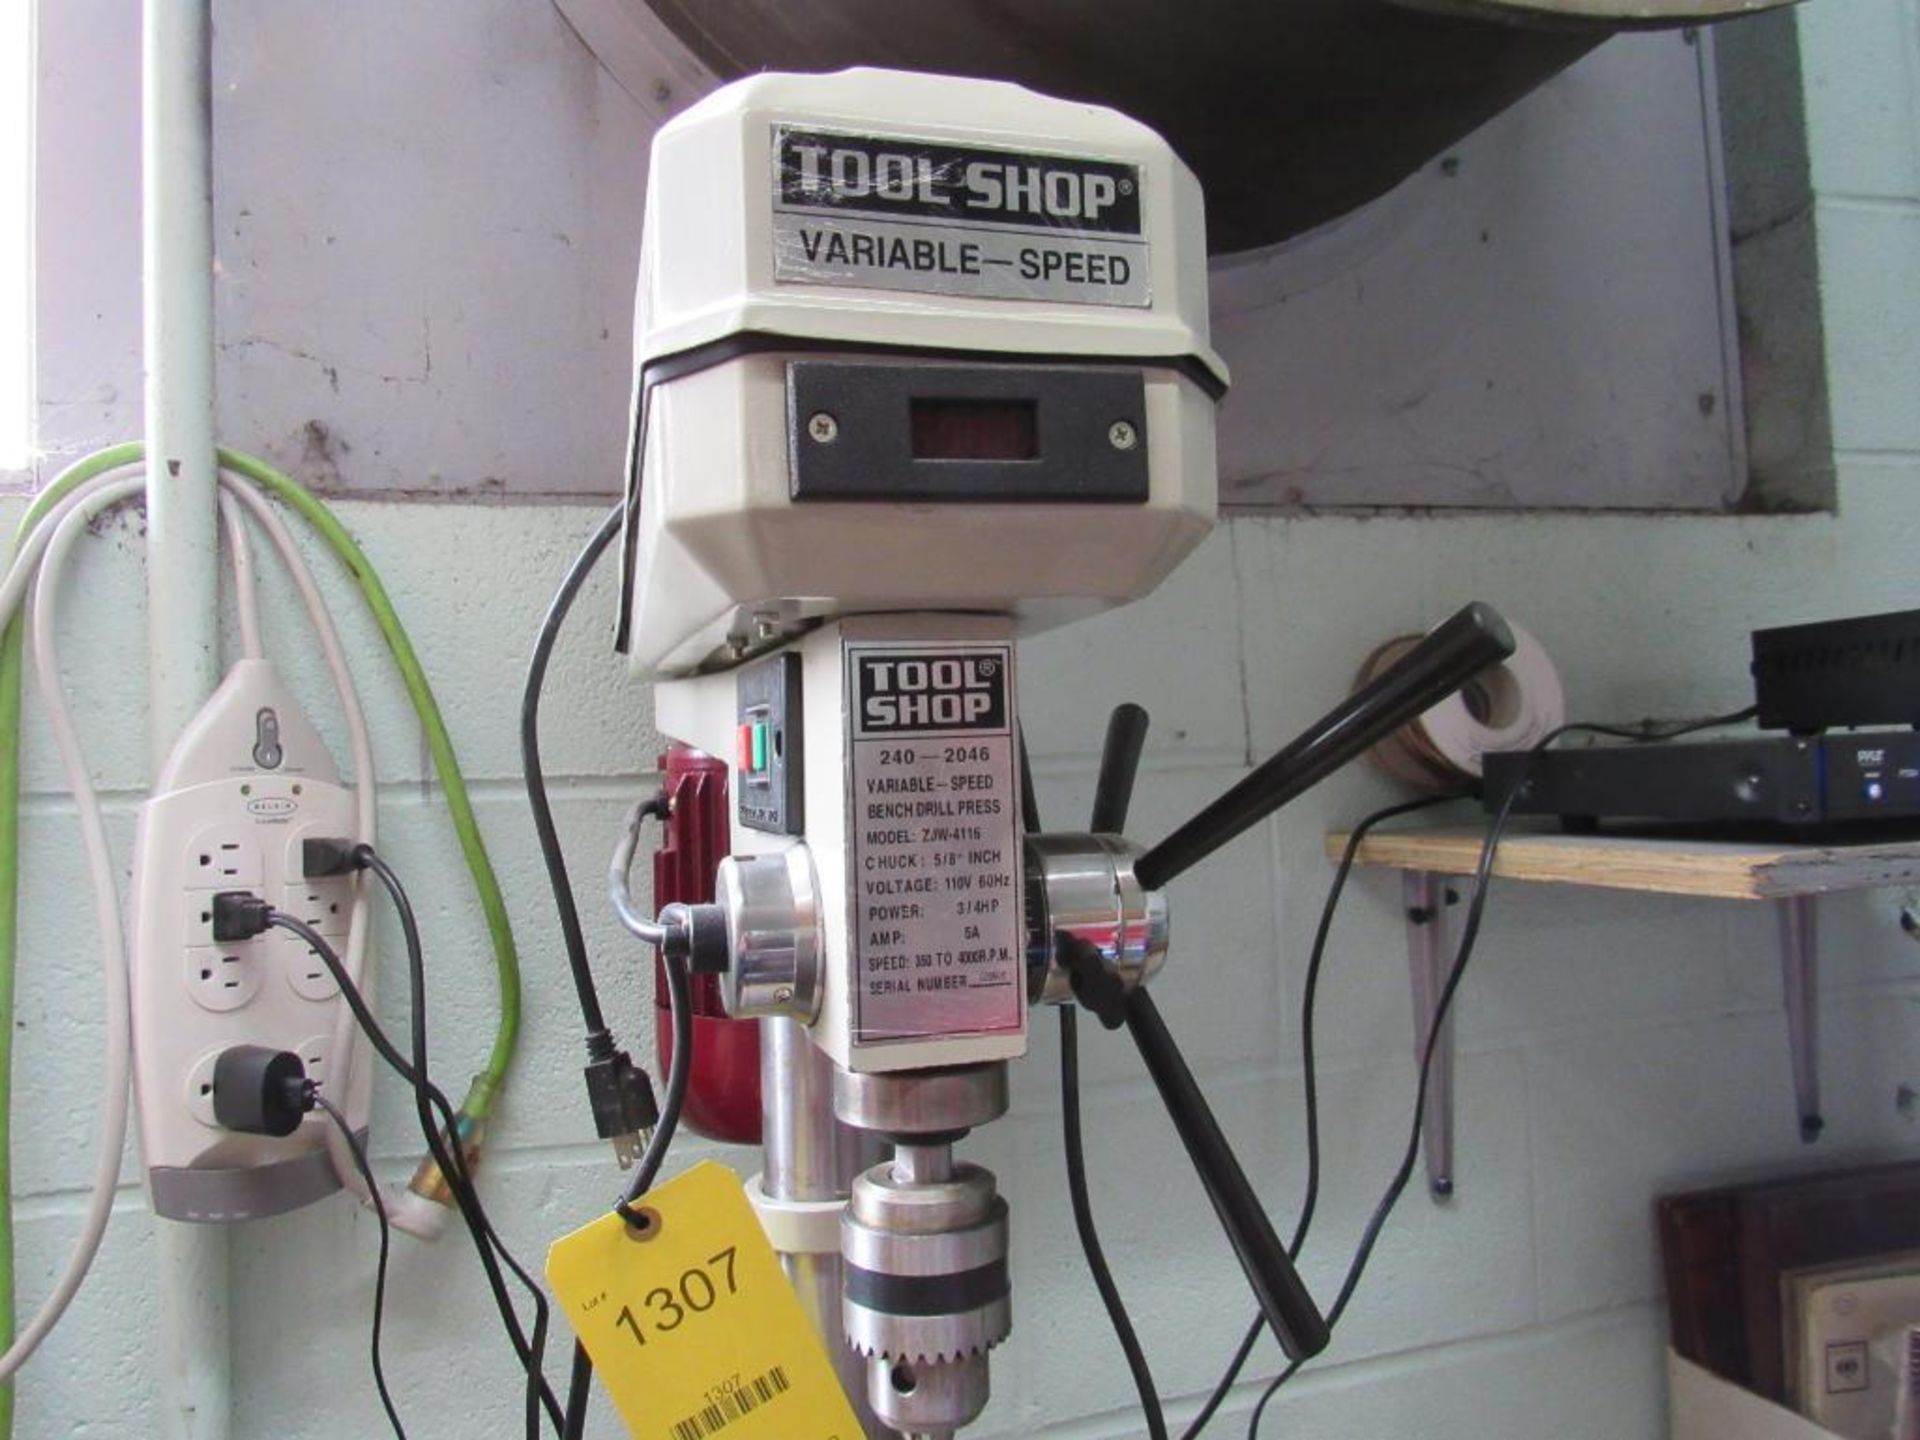 TOOL SHOP Variable Speed Drill Press - Image 2 of 2